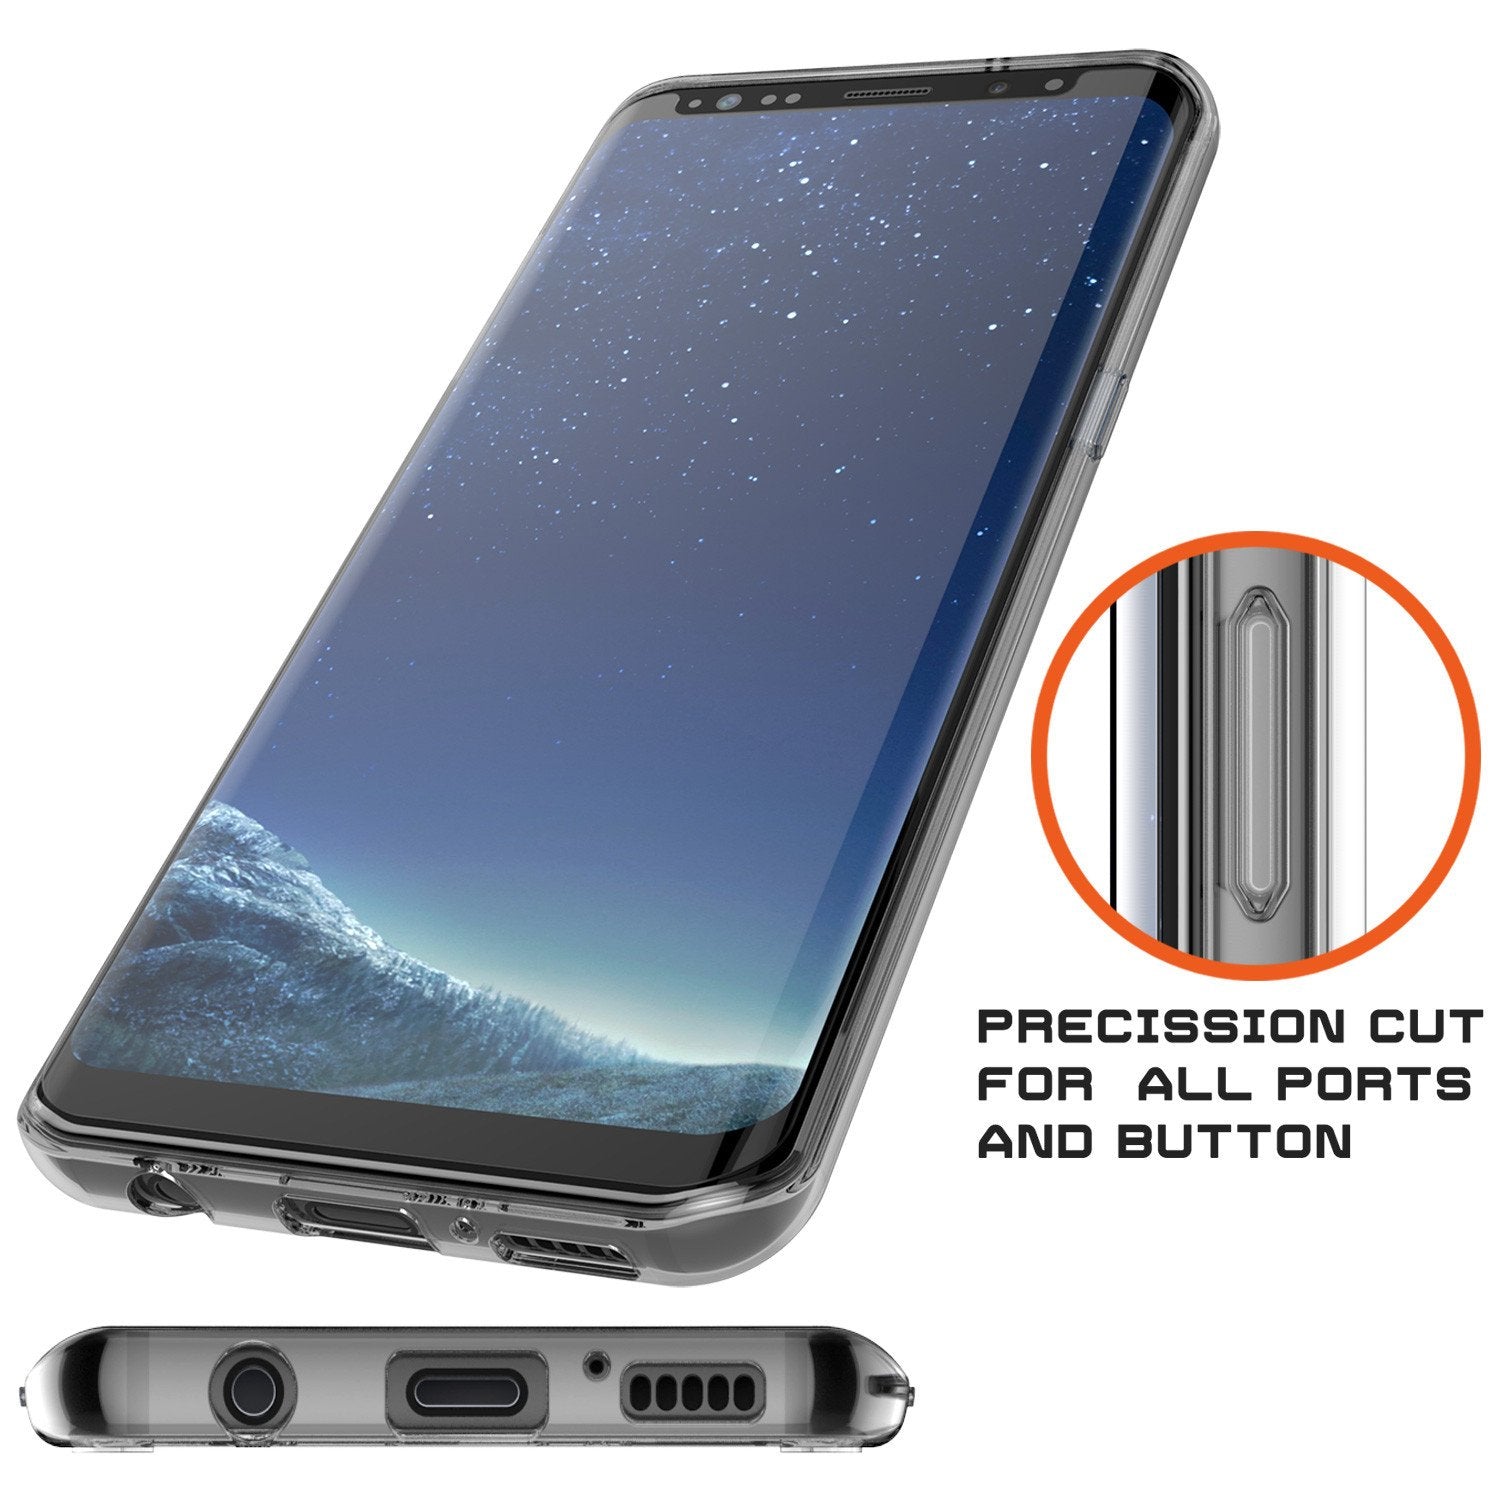 S8 Case Punkcase® LUCID 2.0 Clear Series w/ PUNK SHIELD Screen Protector | Ultra Fit